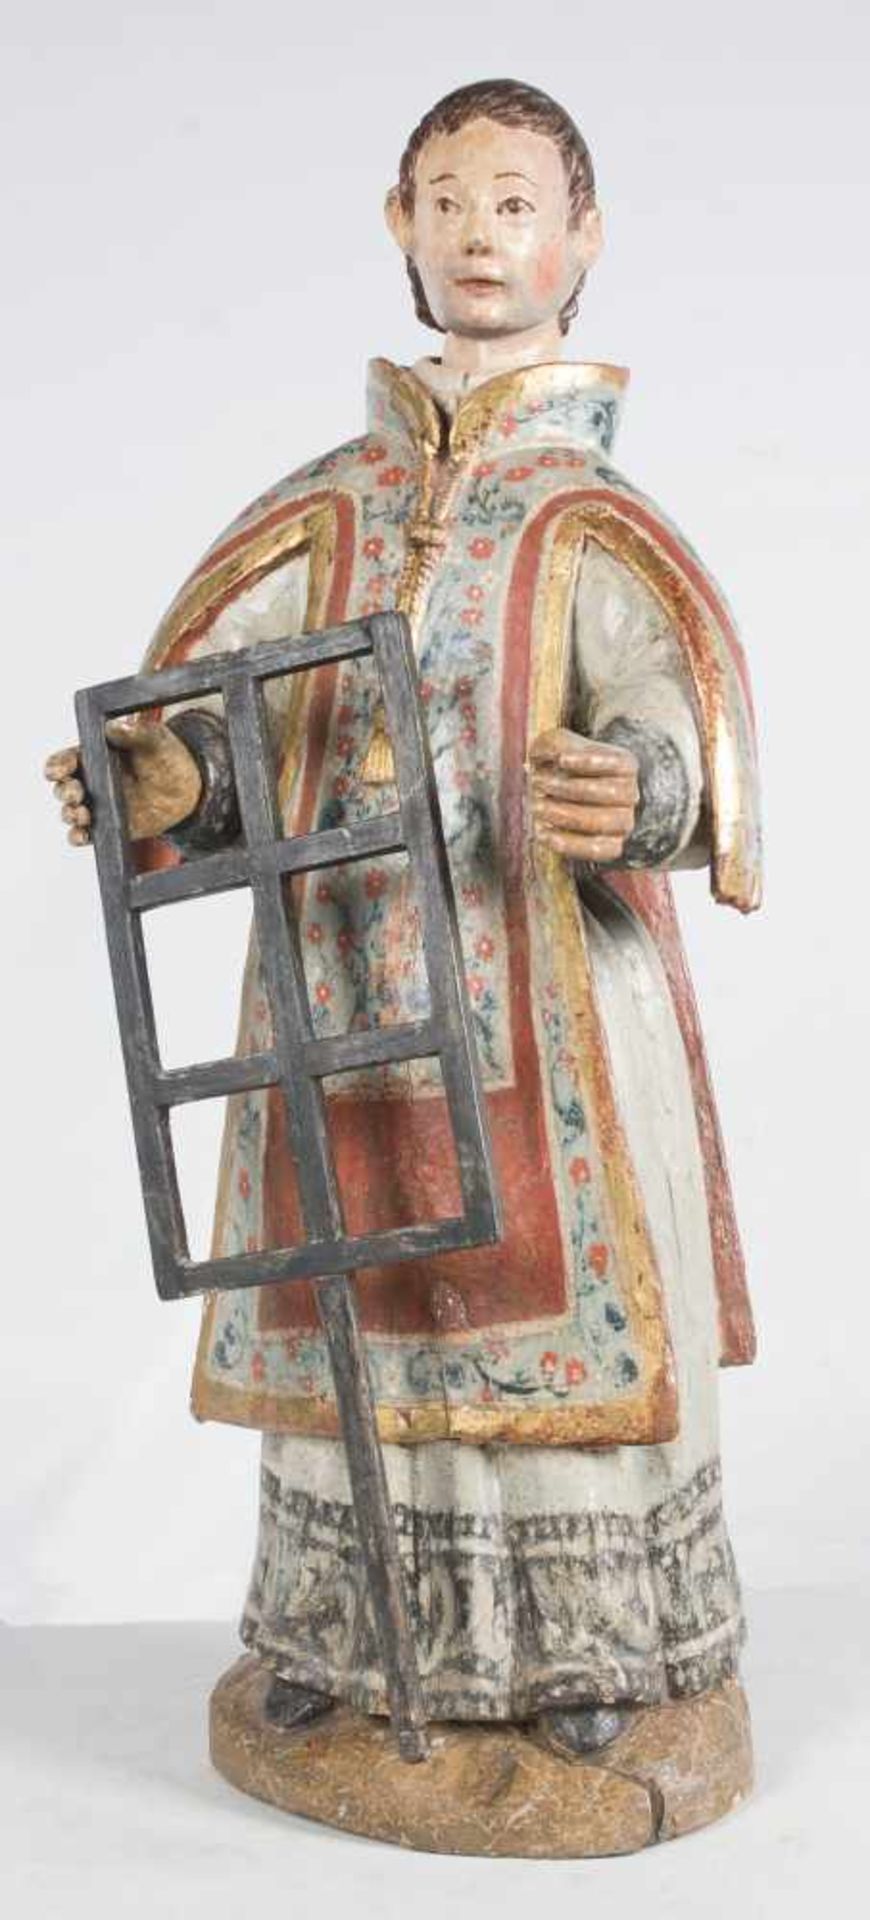 "Lawrence of Rome". Carved, polychromed and gilded wooden sculpture. 17th century. - Bild 2 aus 3